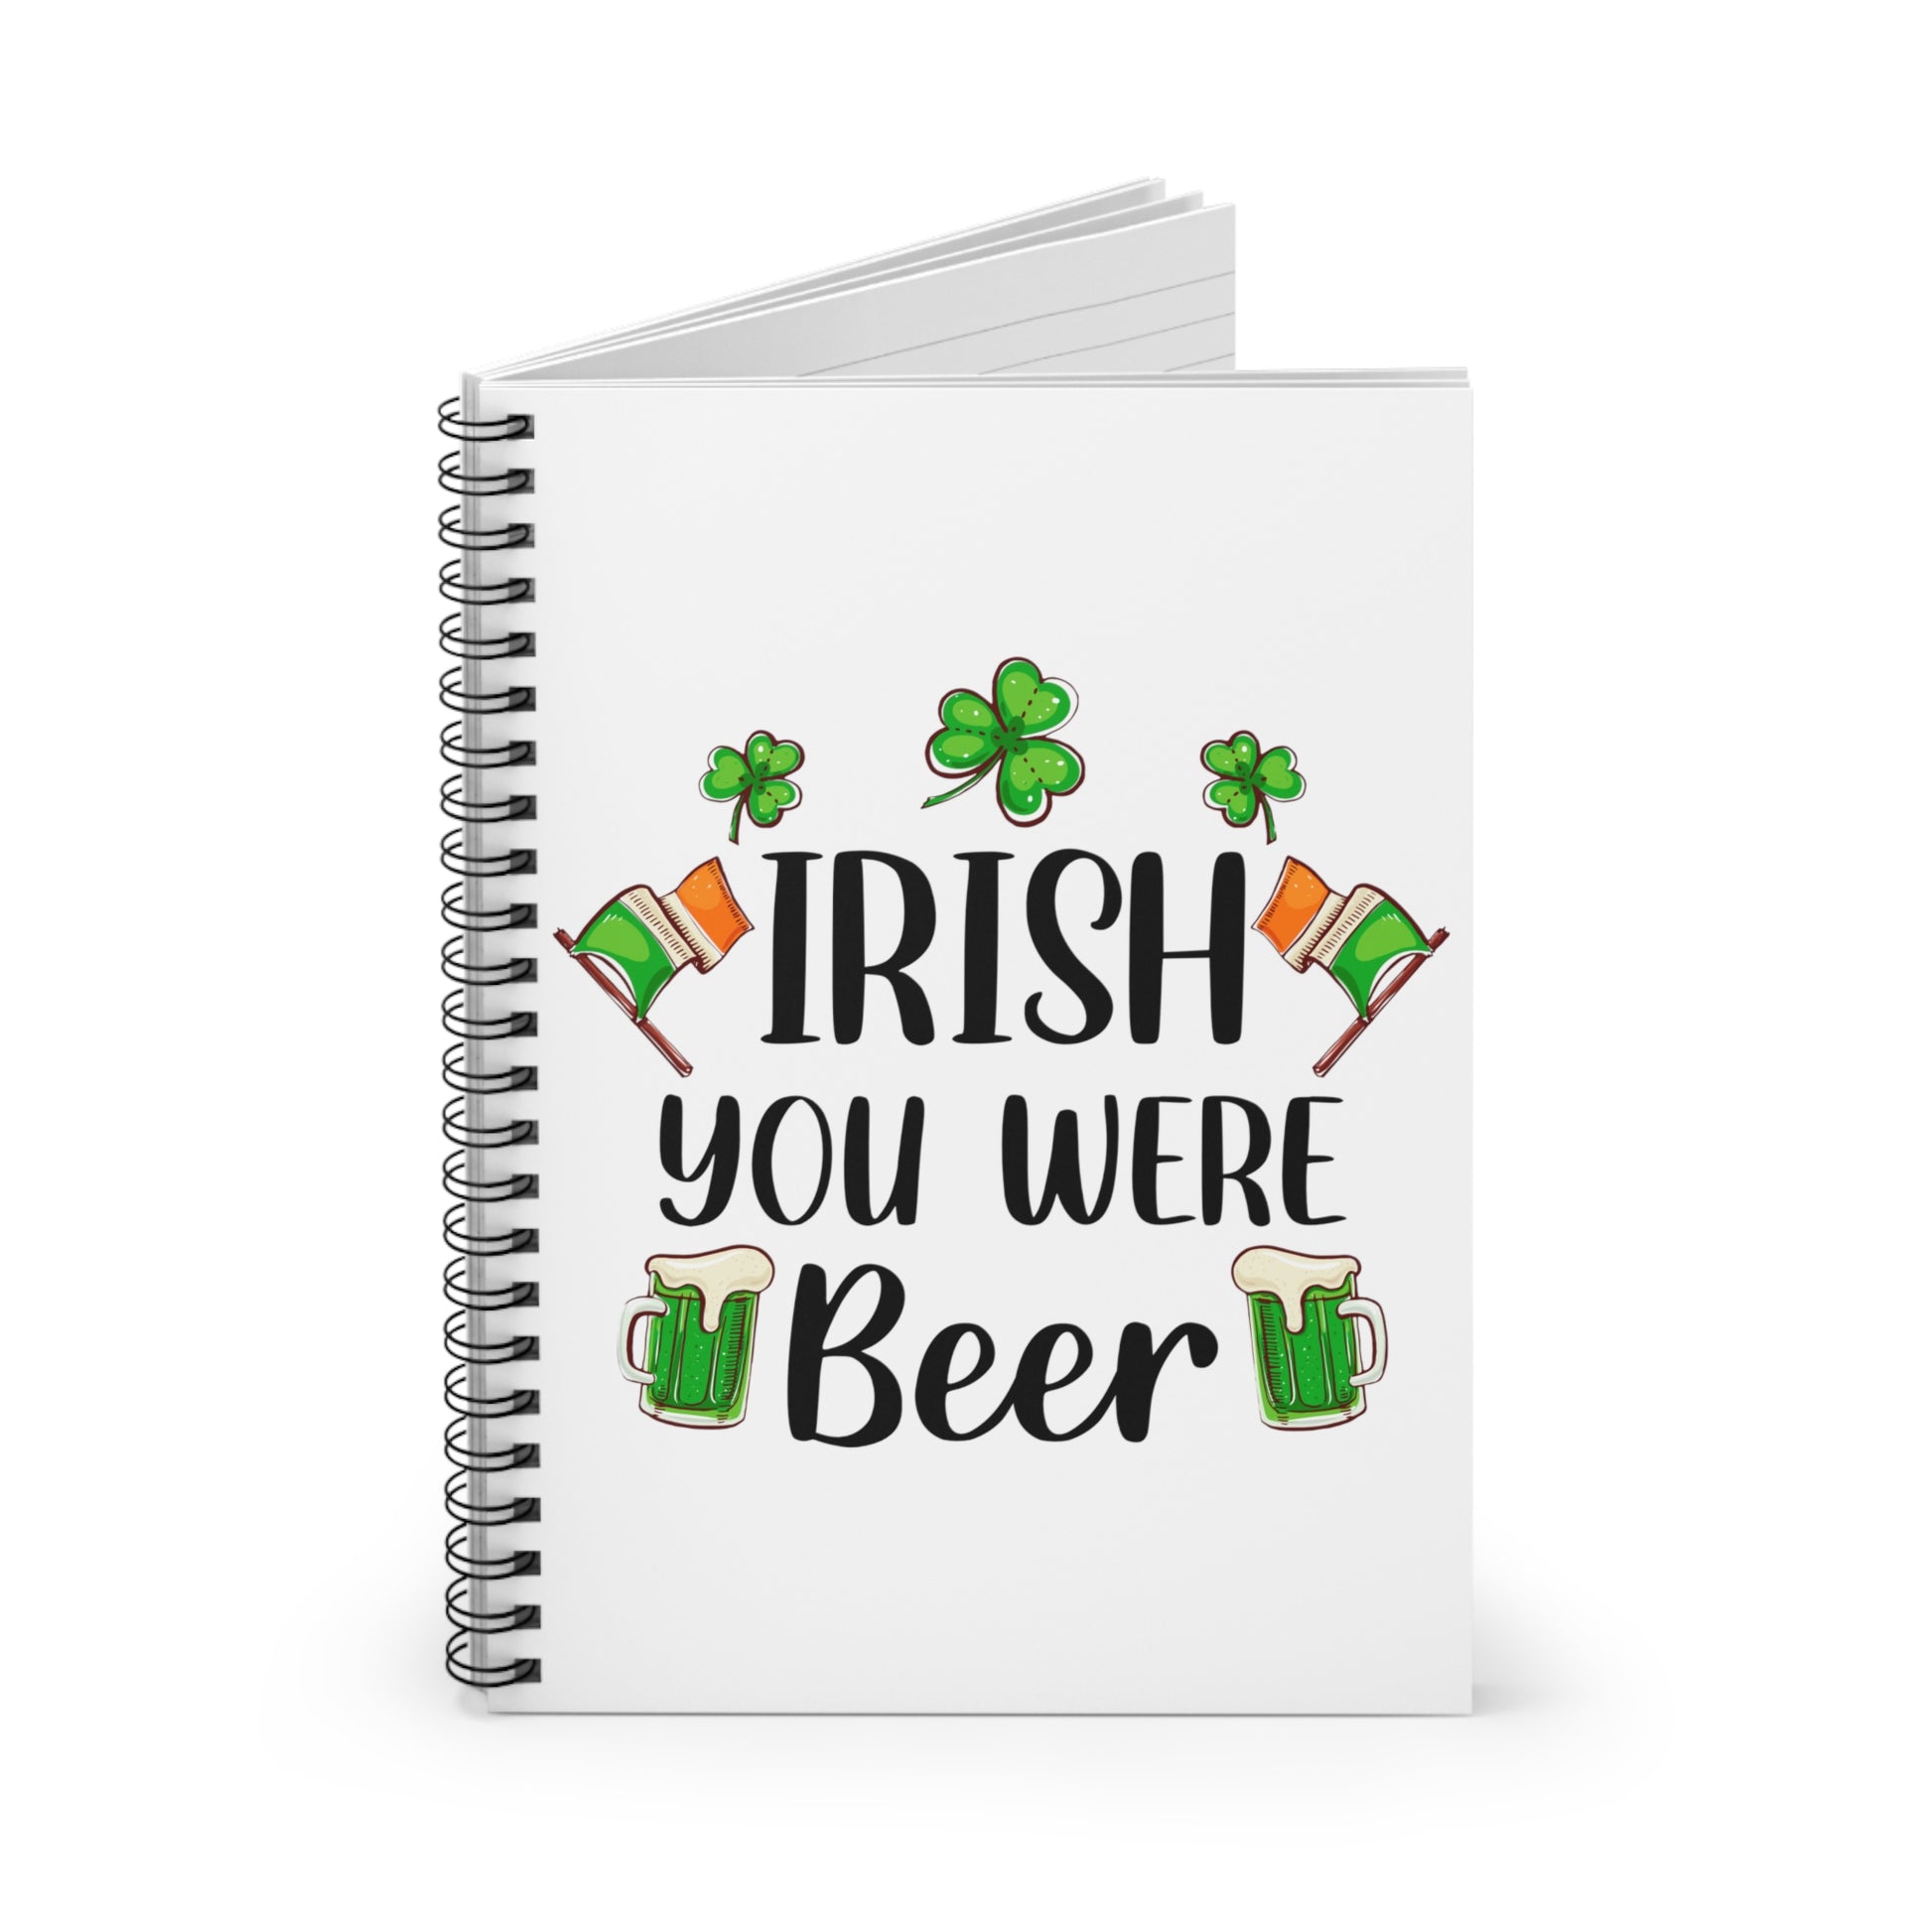 Irish You Were Beer: Spiral Notebook - Log Books - Journals - Diaries - and More Custom Printed by TheGlassyLass